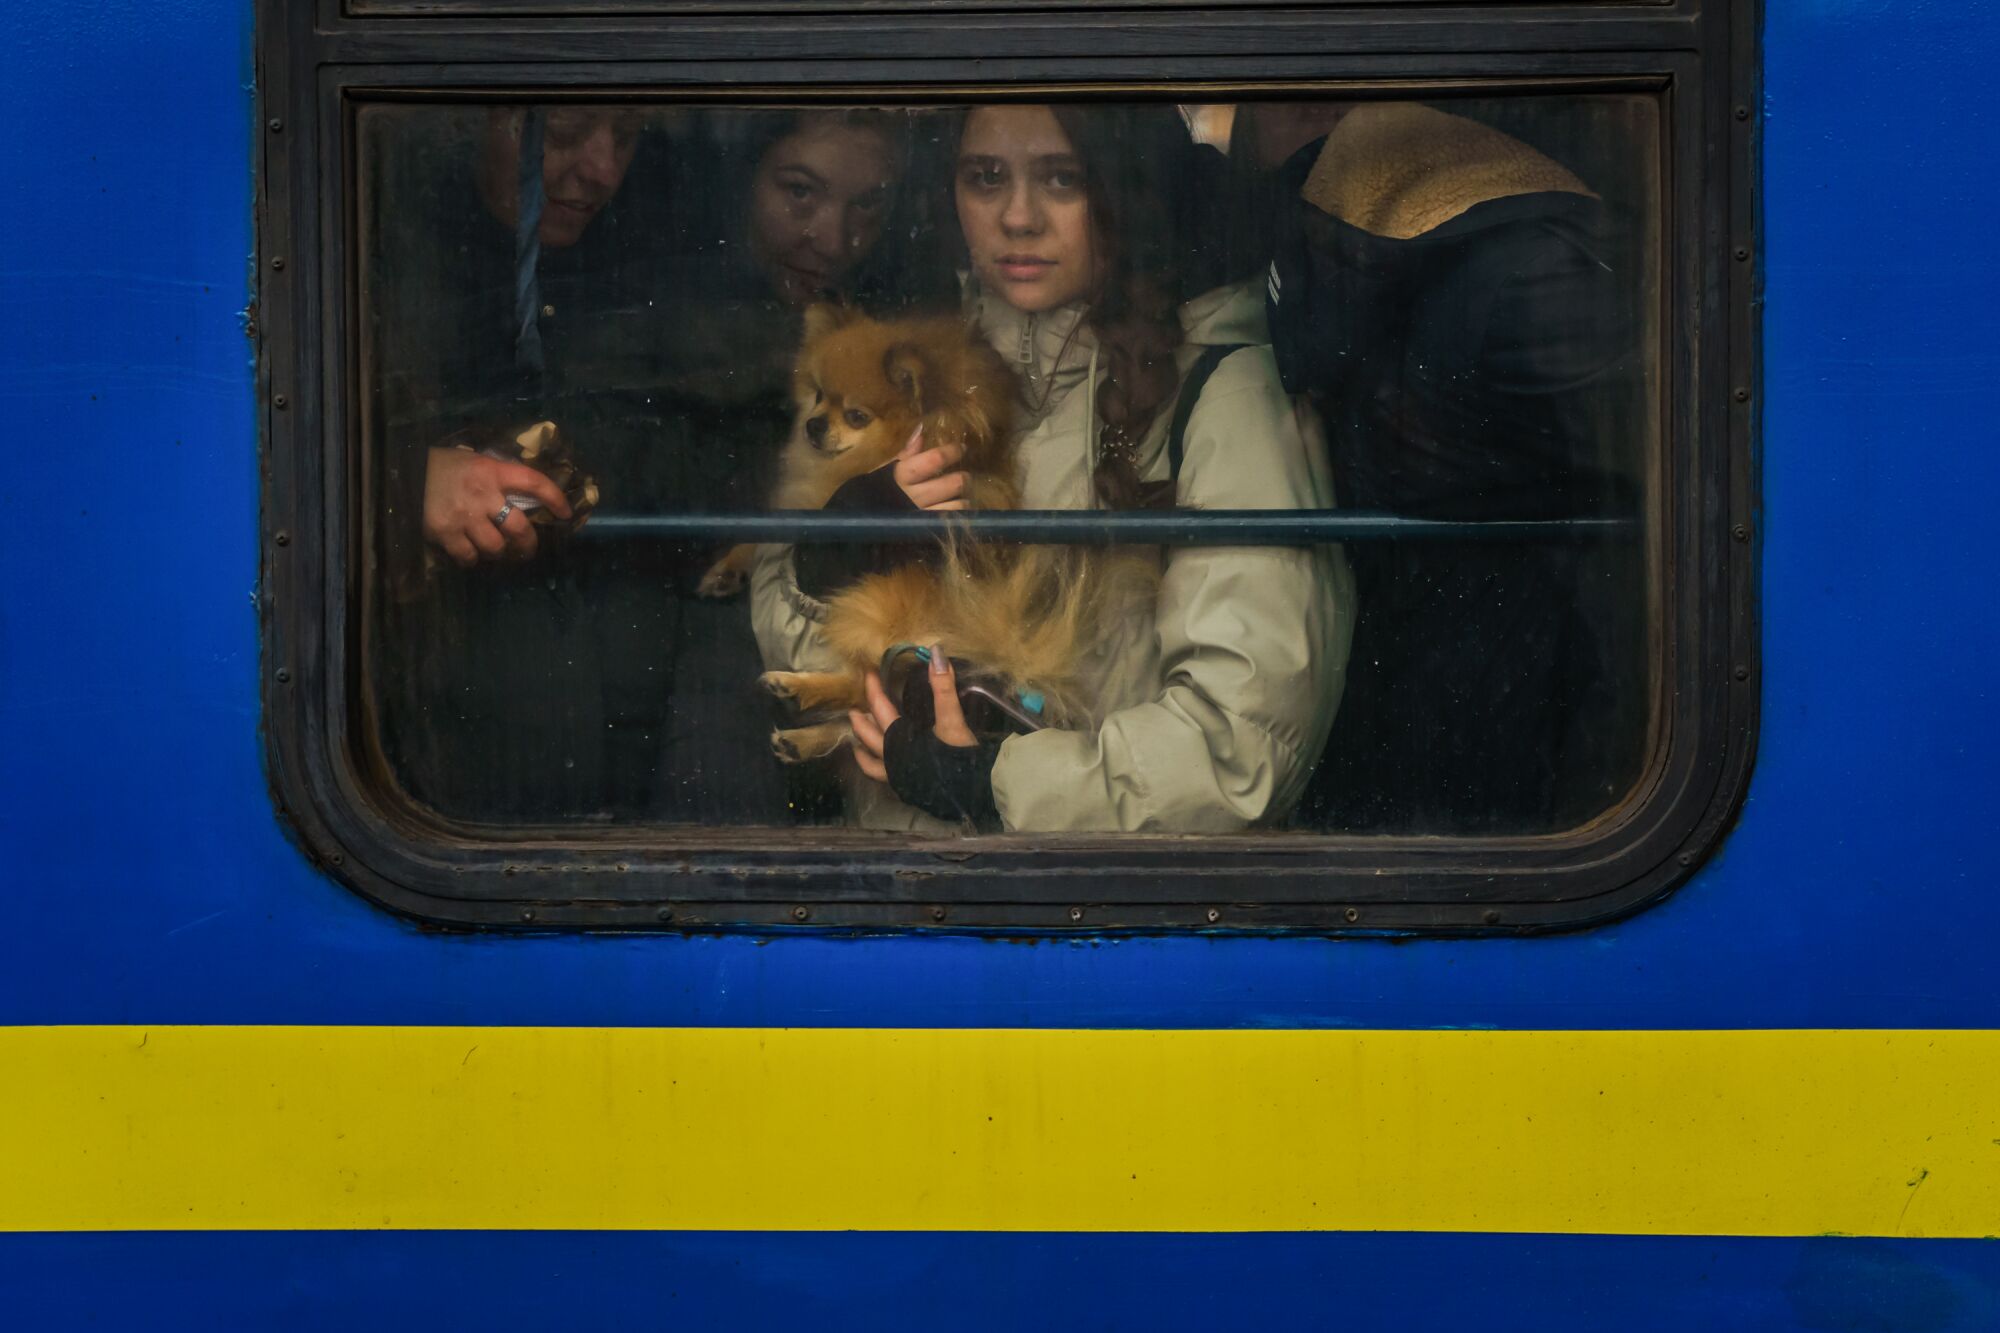 A woman holding a dog looks out a train window. 